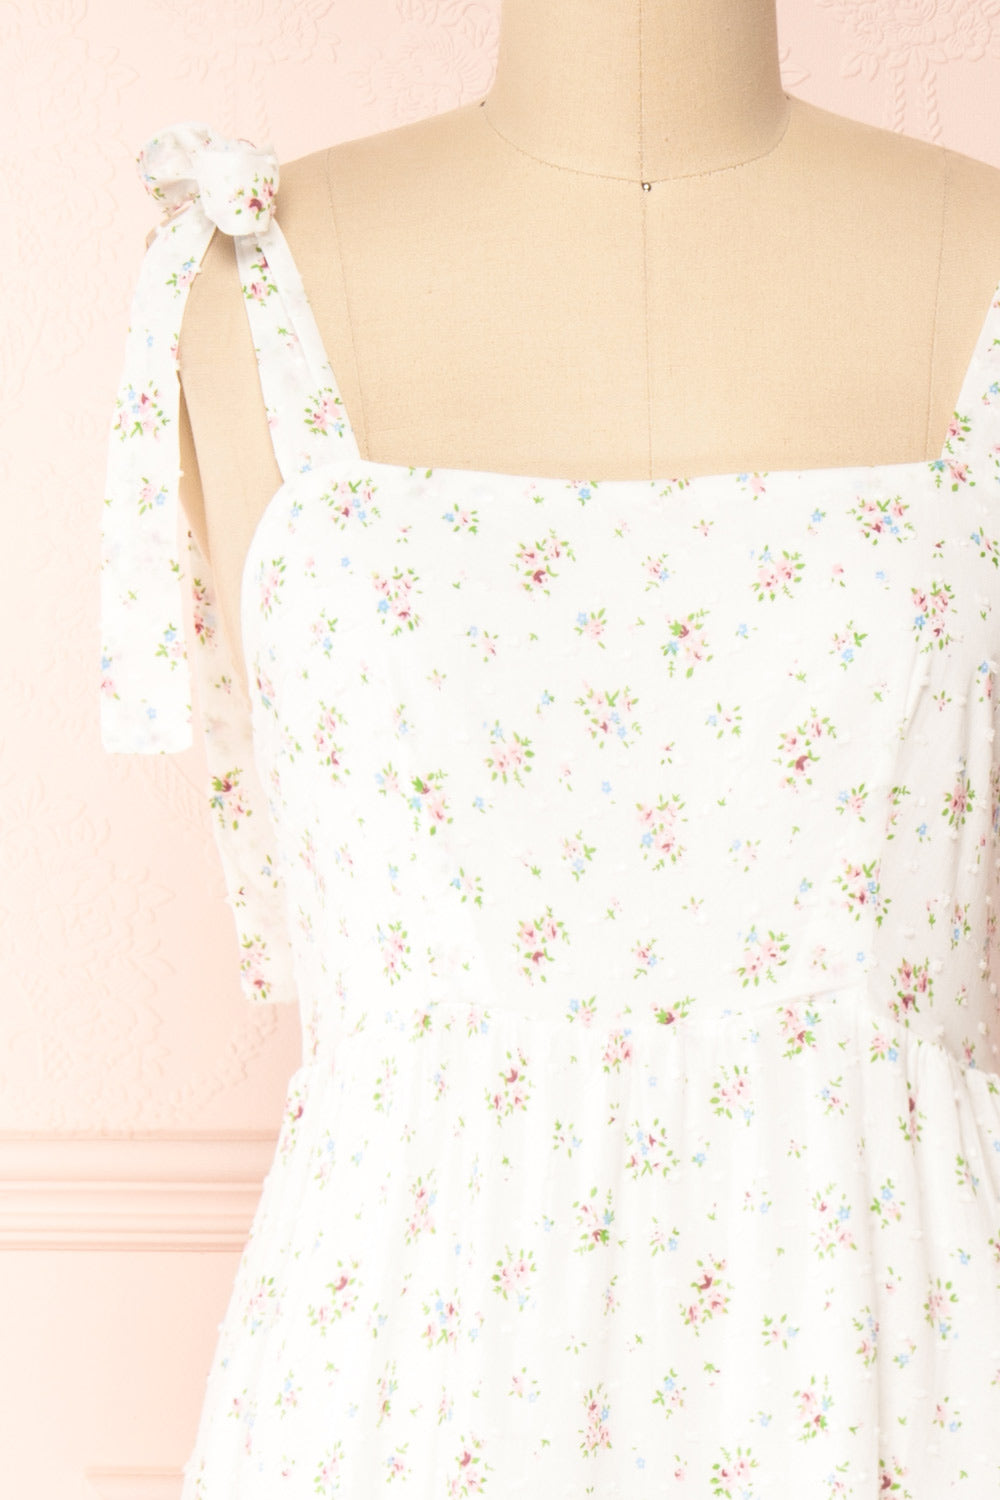 Anadara White Floral Layered Midi Dress | Boutique 1861 front close-up